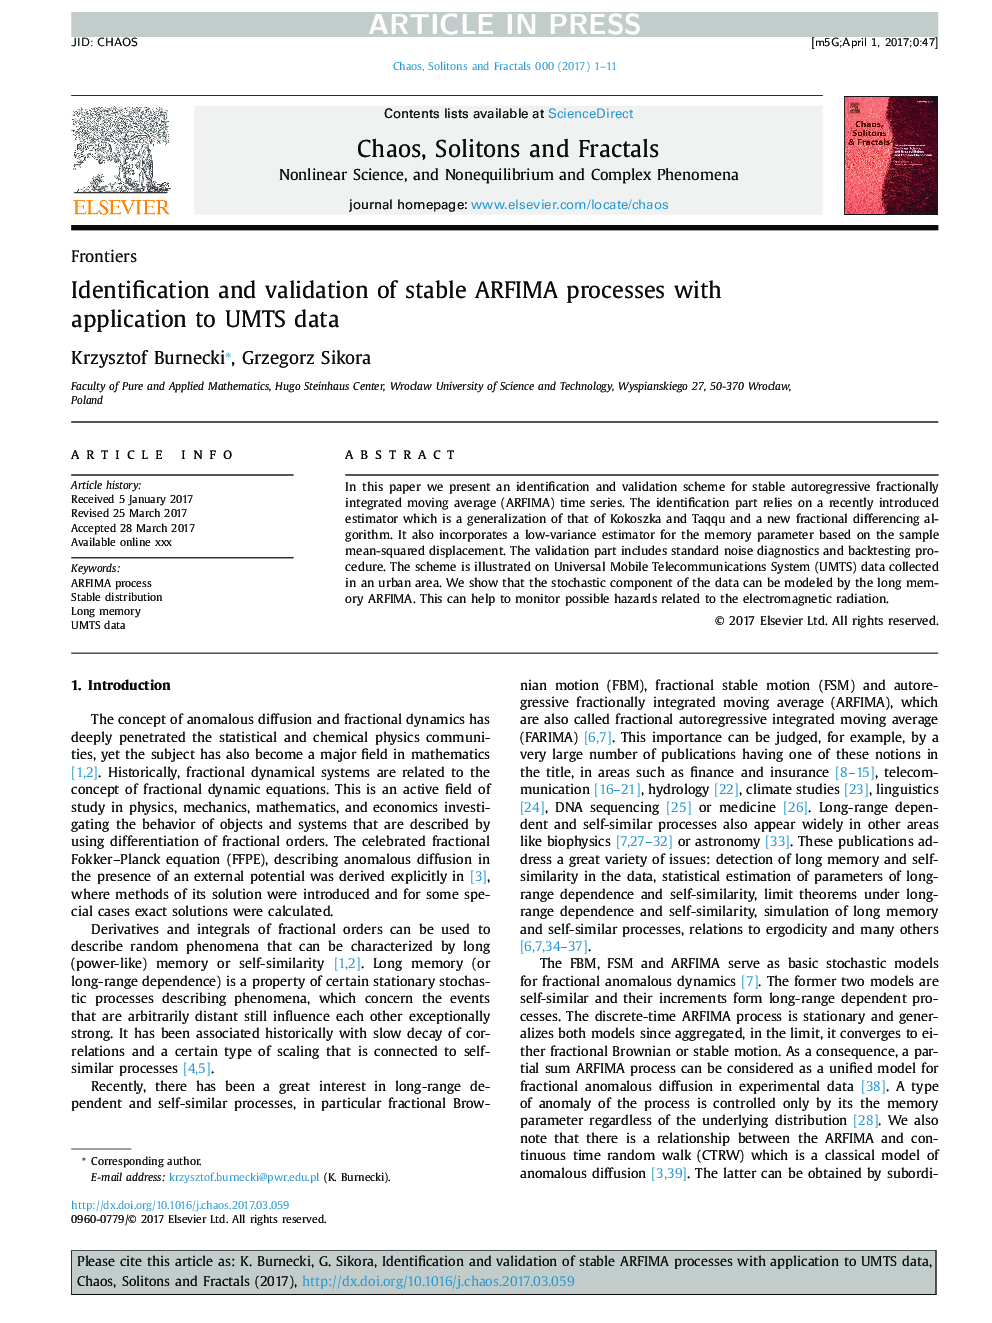 Identification and validation of stable ARFIMA processes with application to UMTS data